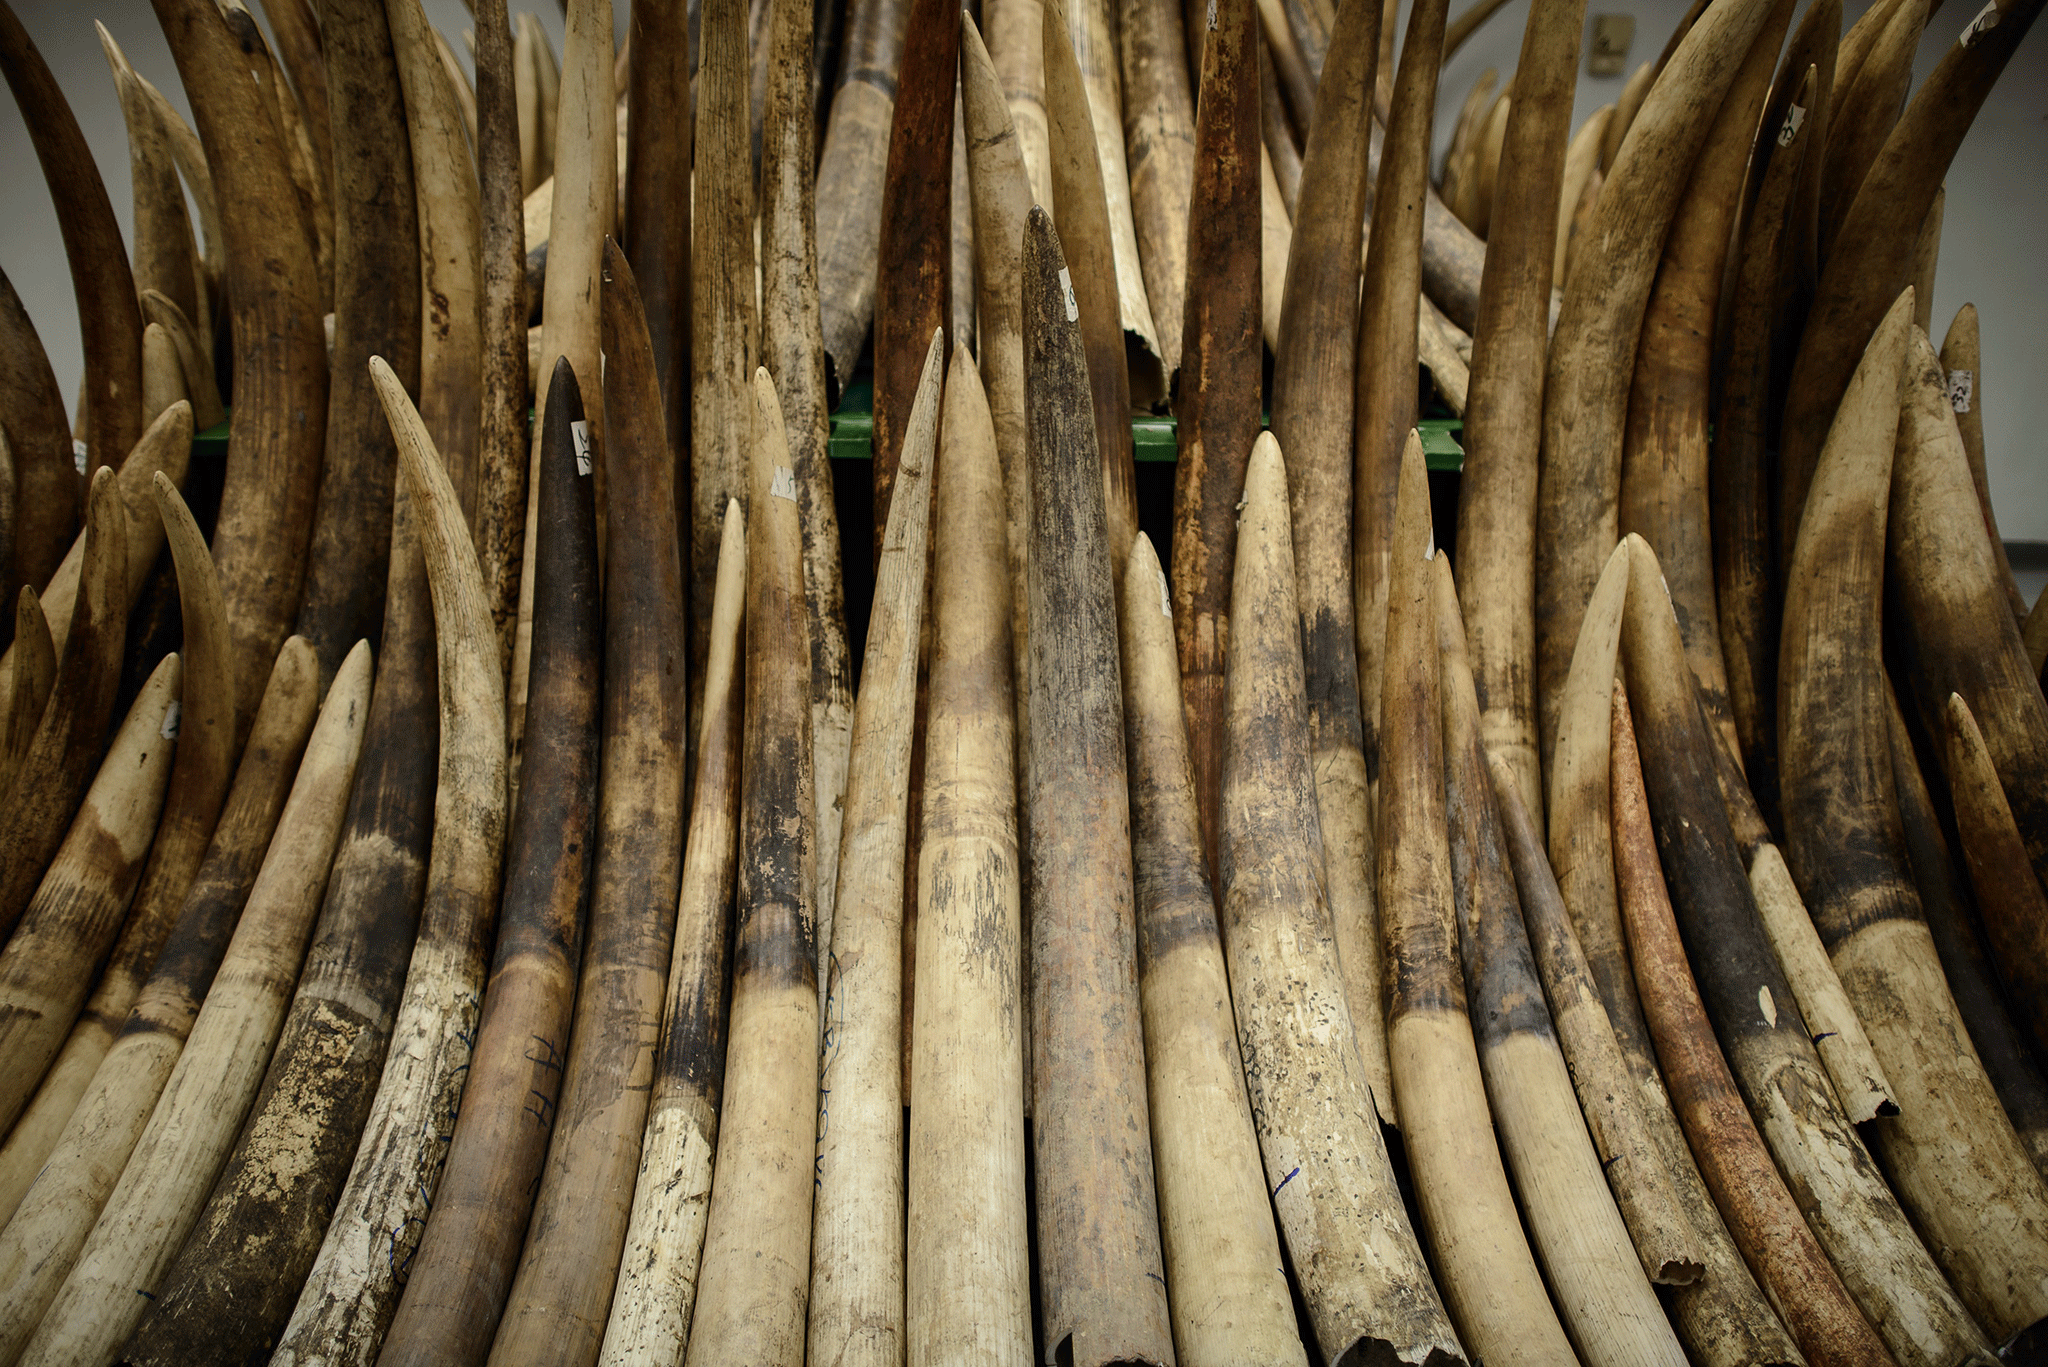 Ivory is now worth over a thousand pounds per kilo